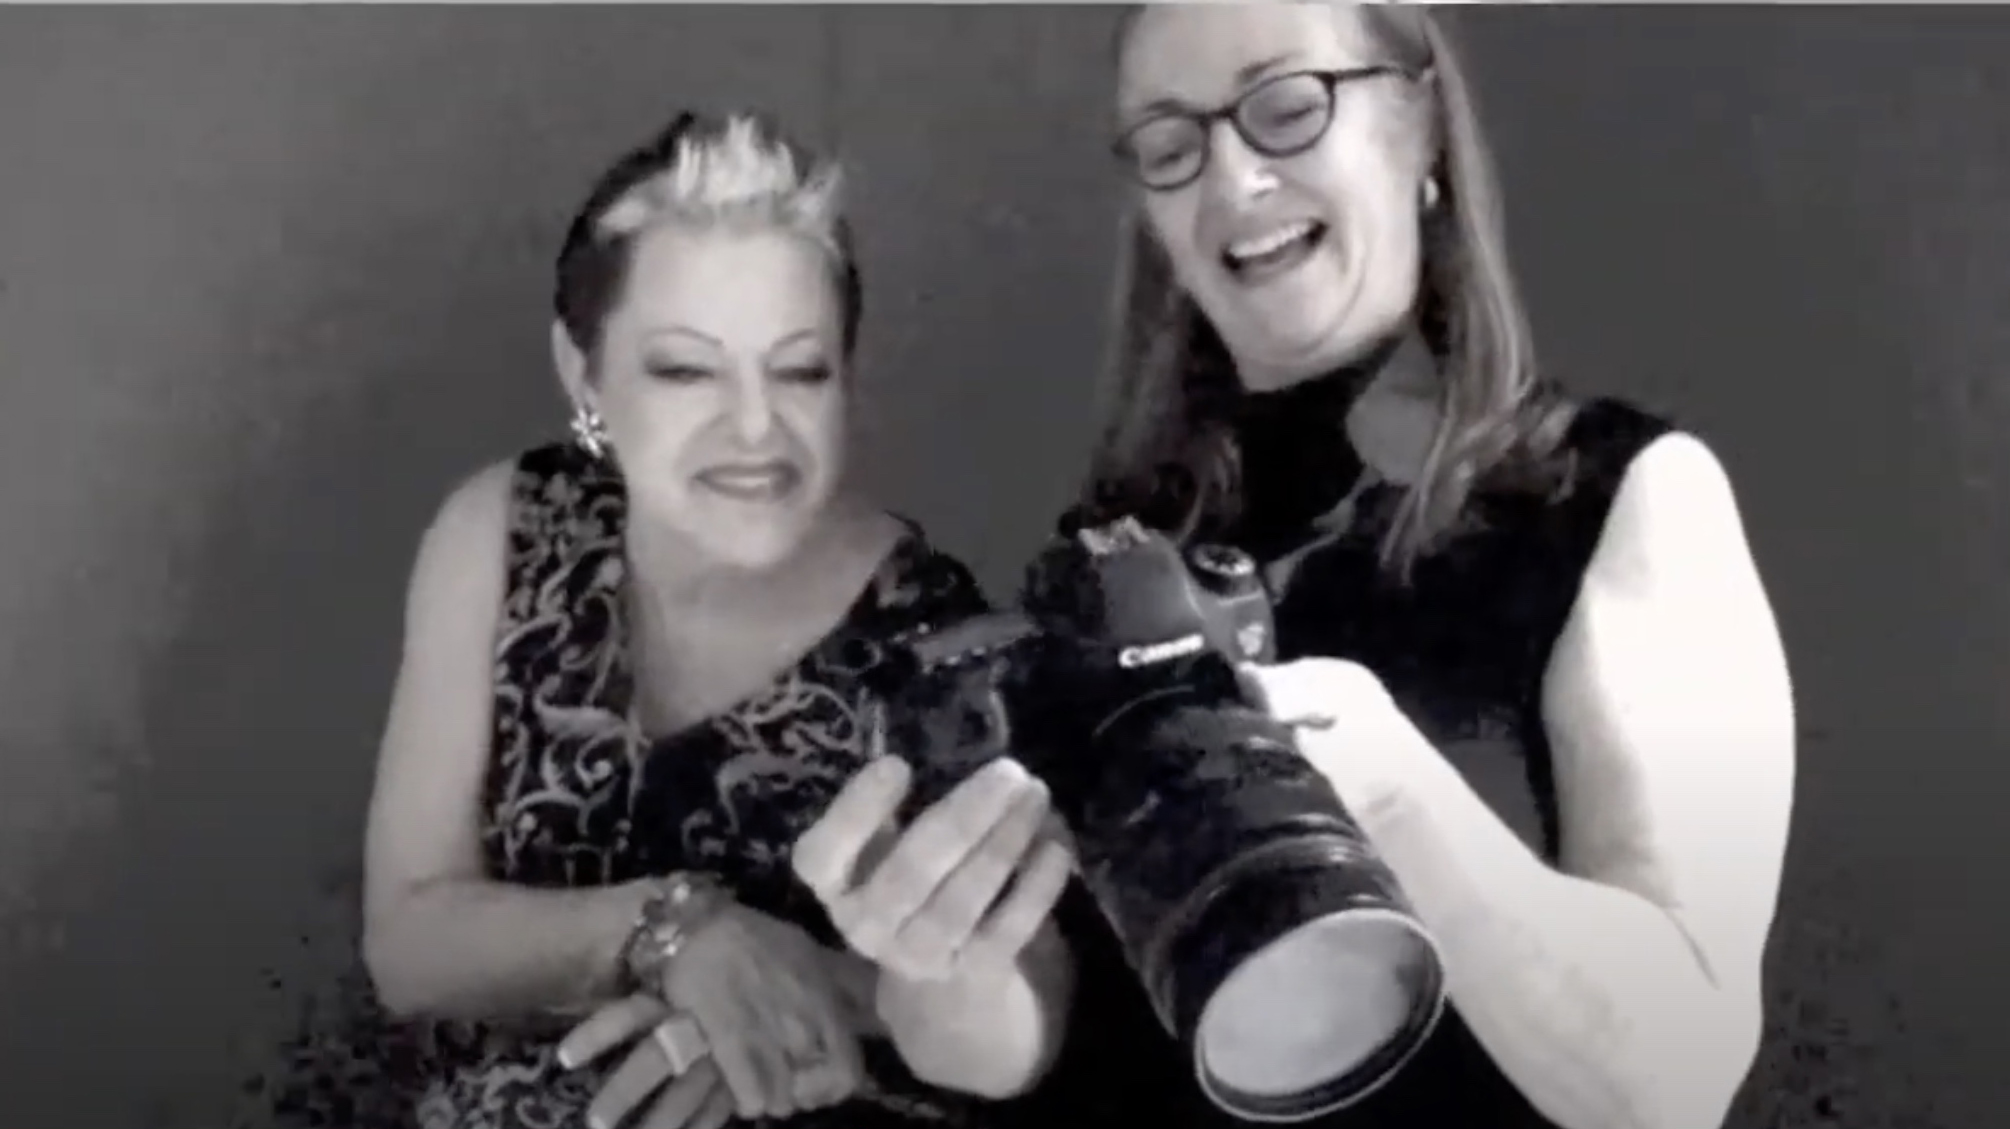 two-ladies-laughing-while-looking-at-the-camera-at-a-boudoir-photo-shoot